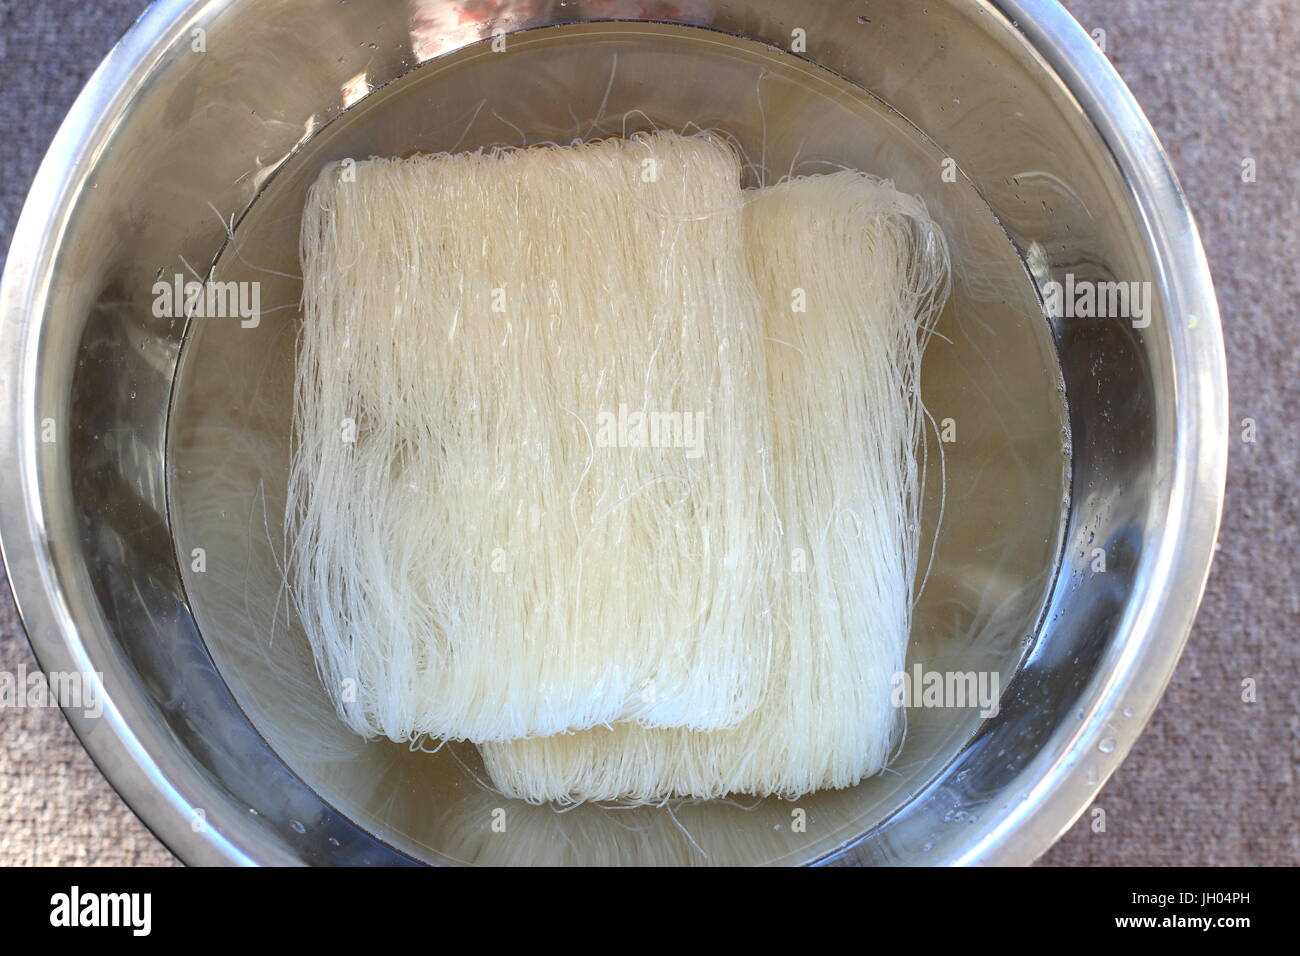 Soaking Rice vermicelli noodles before cooking Stock Photo